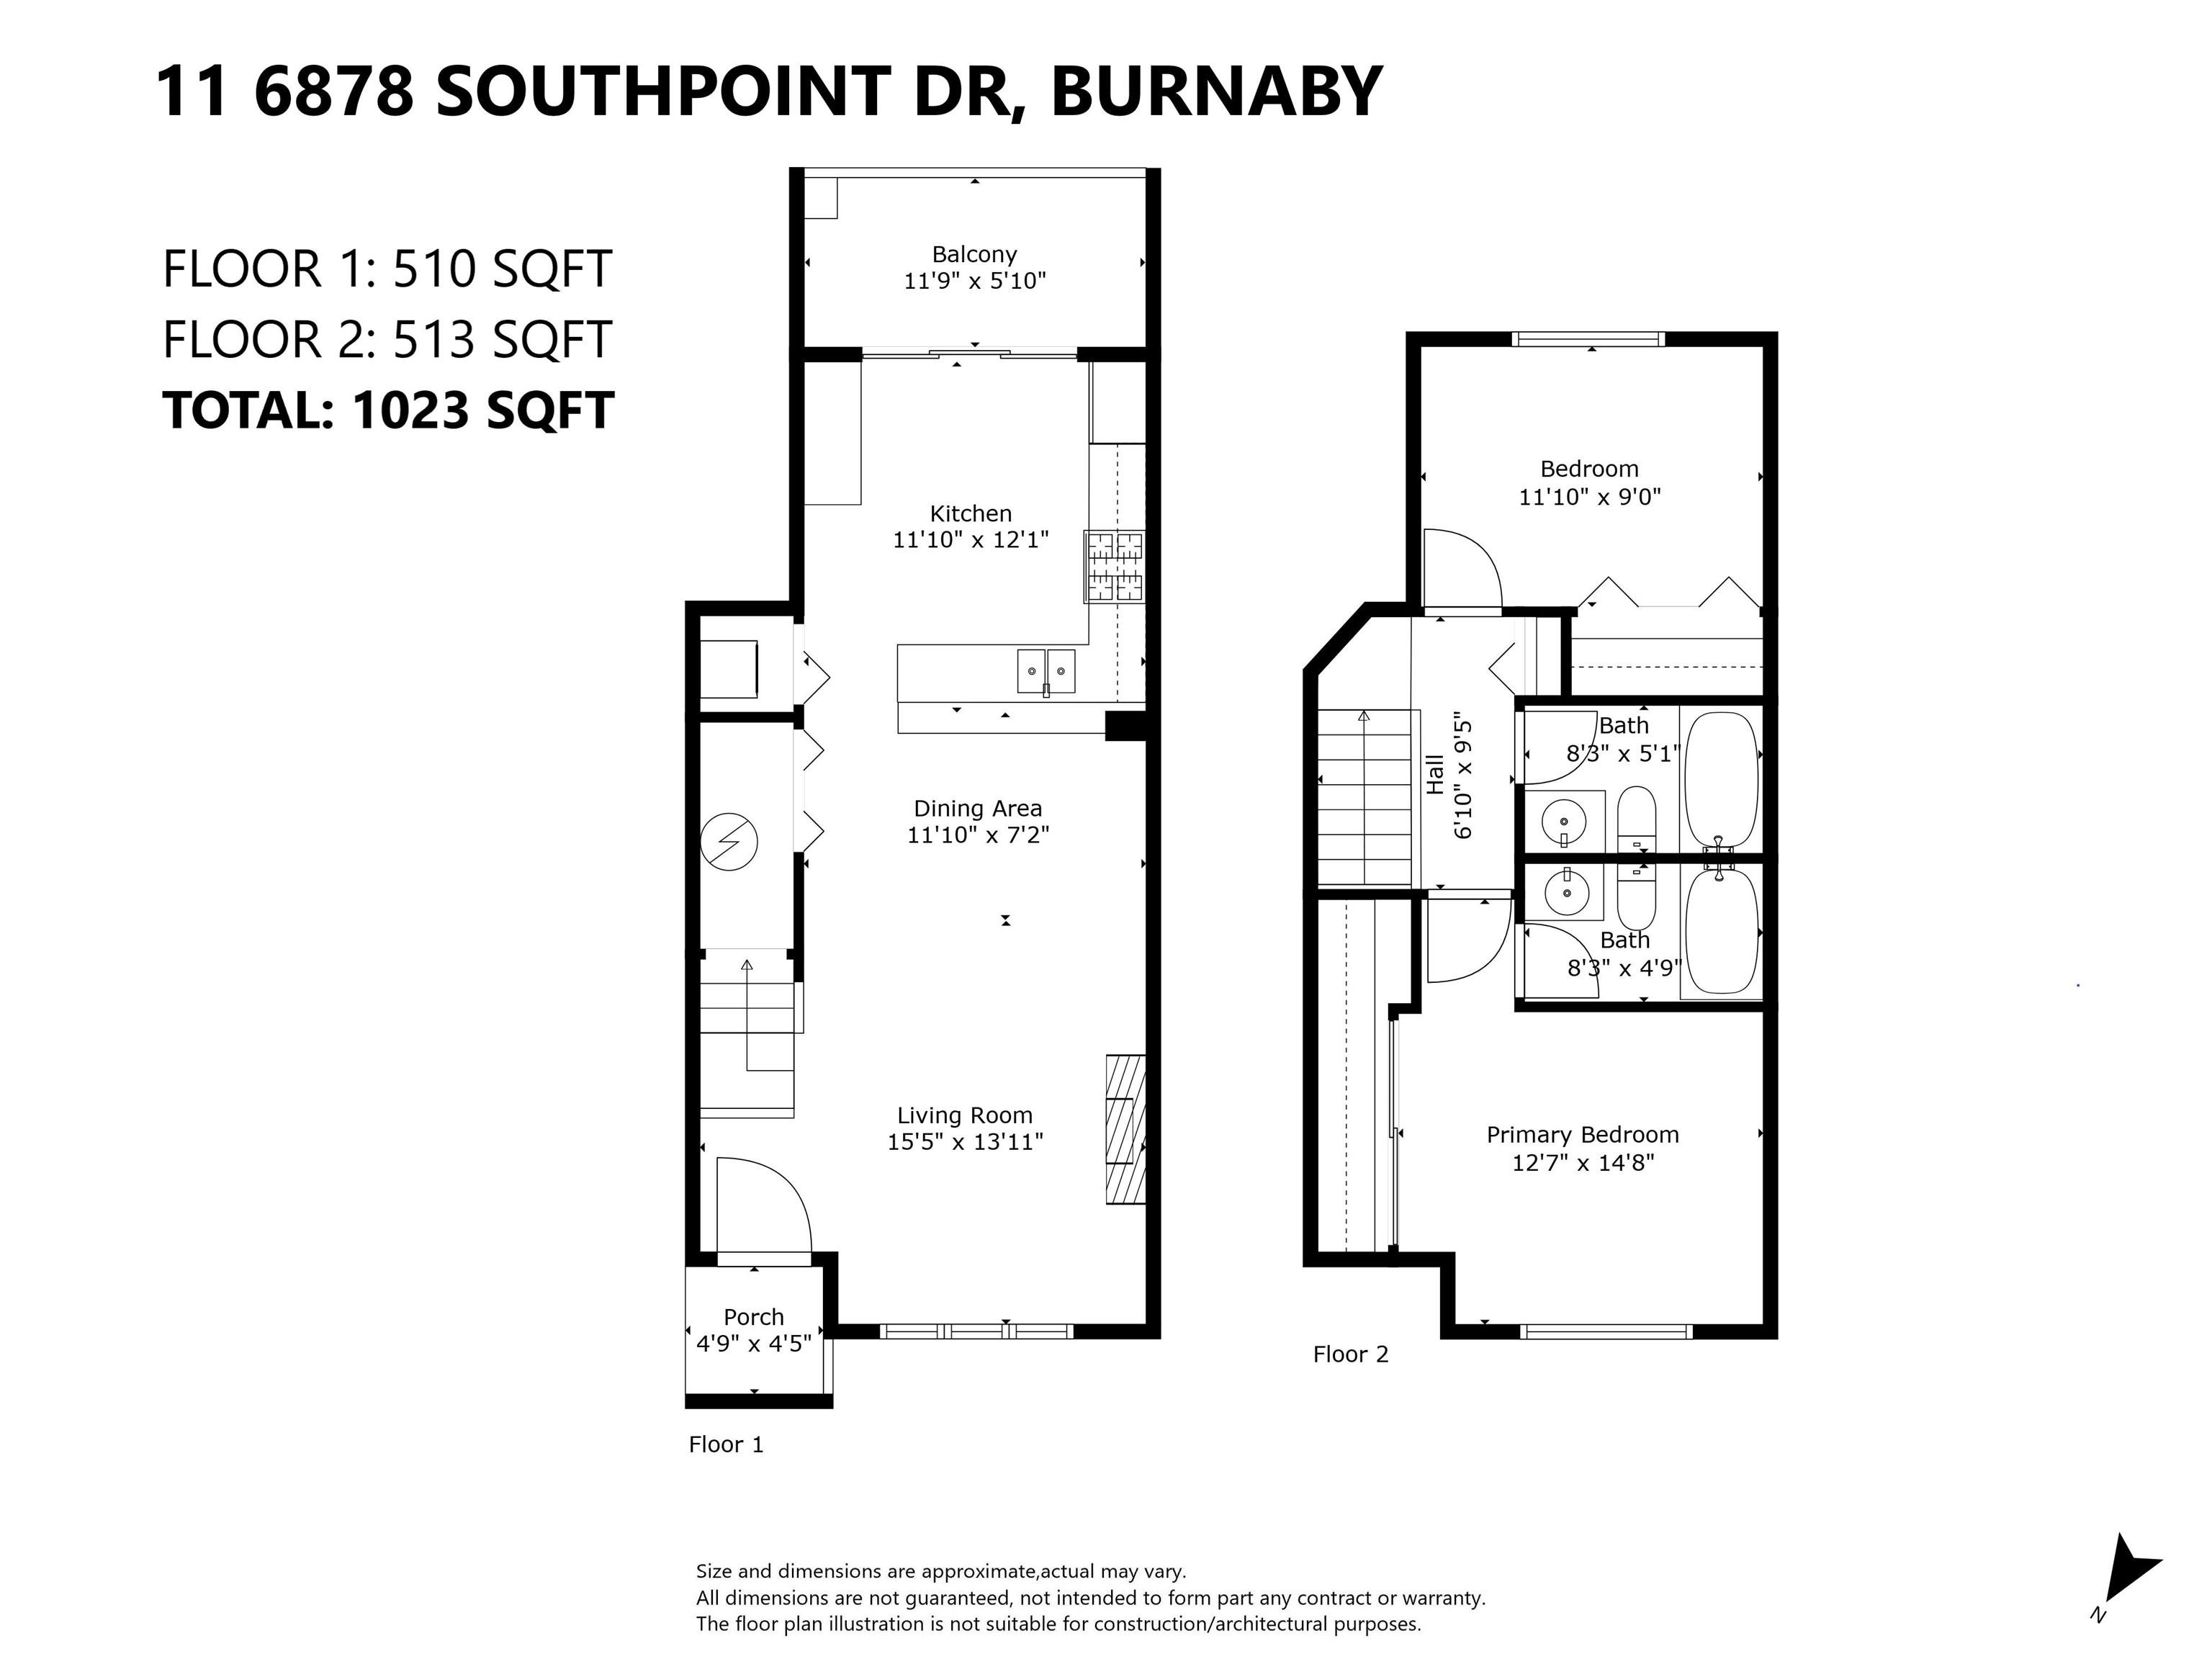 11-6878 SOUTHPOINT DRIVE, Burnaby, British Columbia R2851429